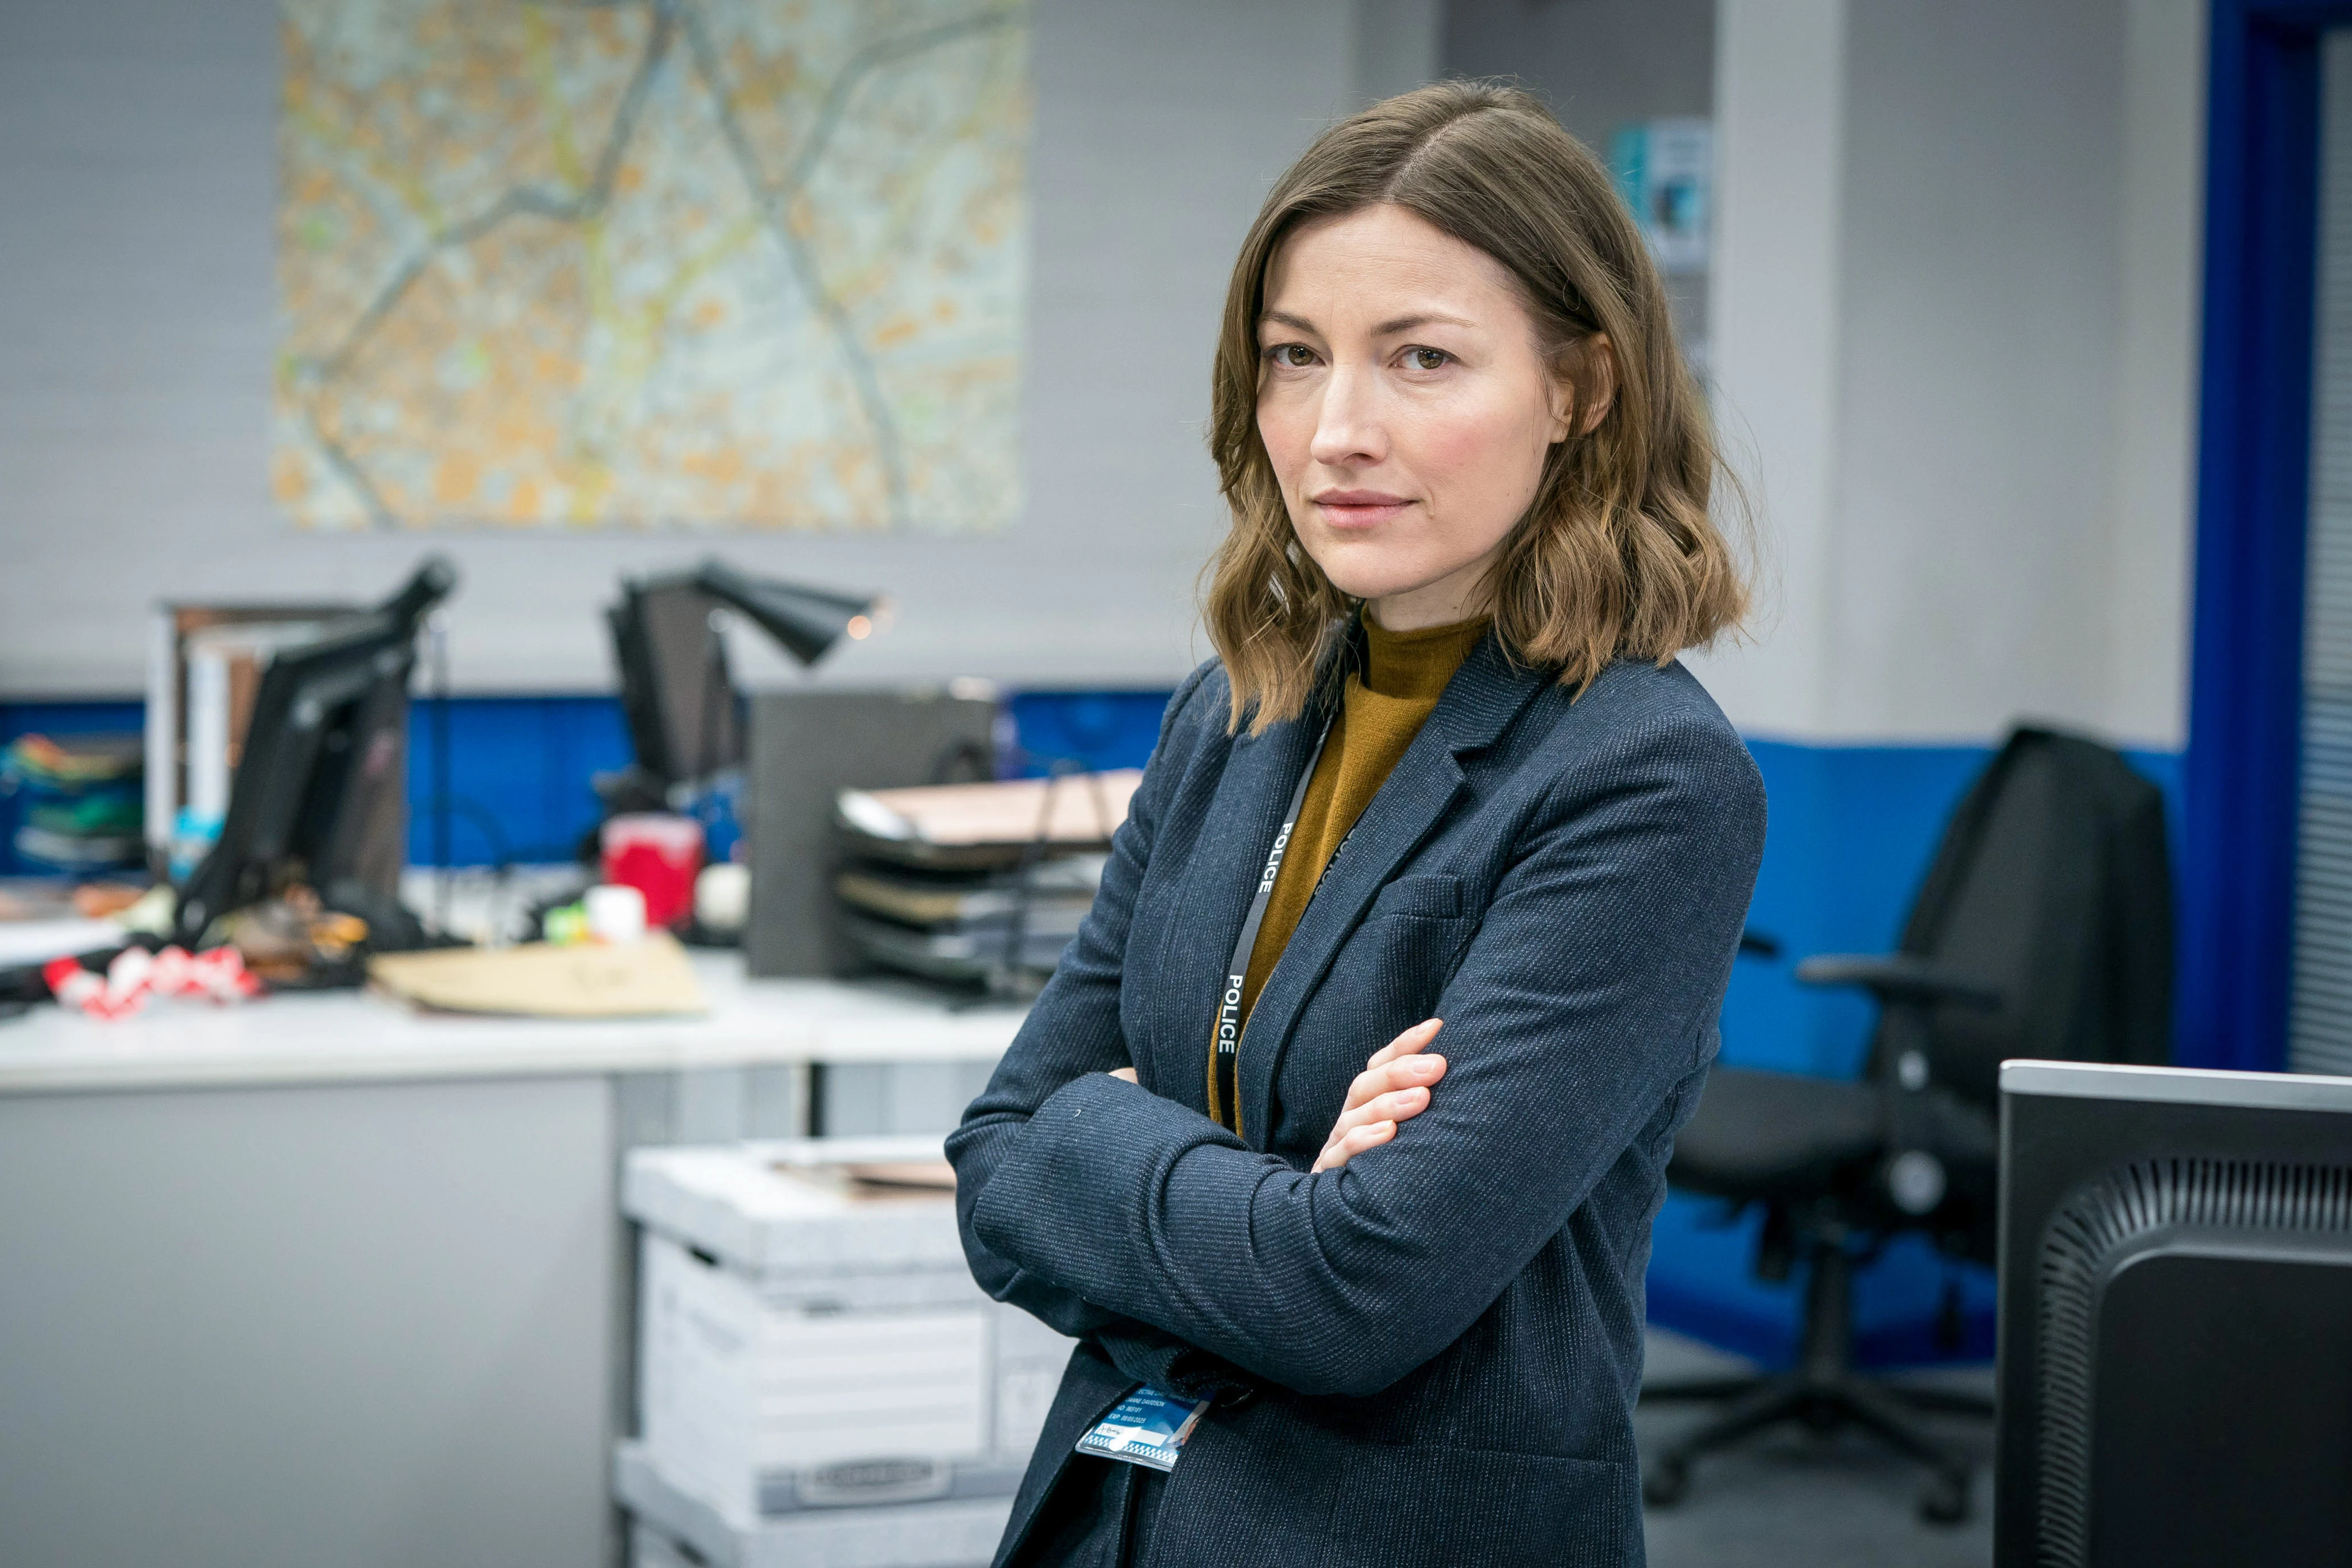 Who Is Kelly Macdonald With Now? Who Is Kelly Macdonald Married To?